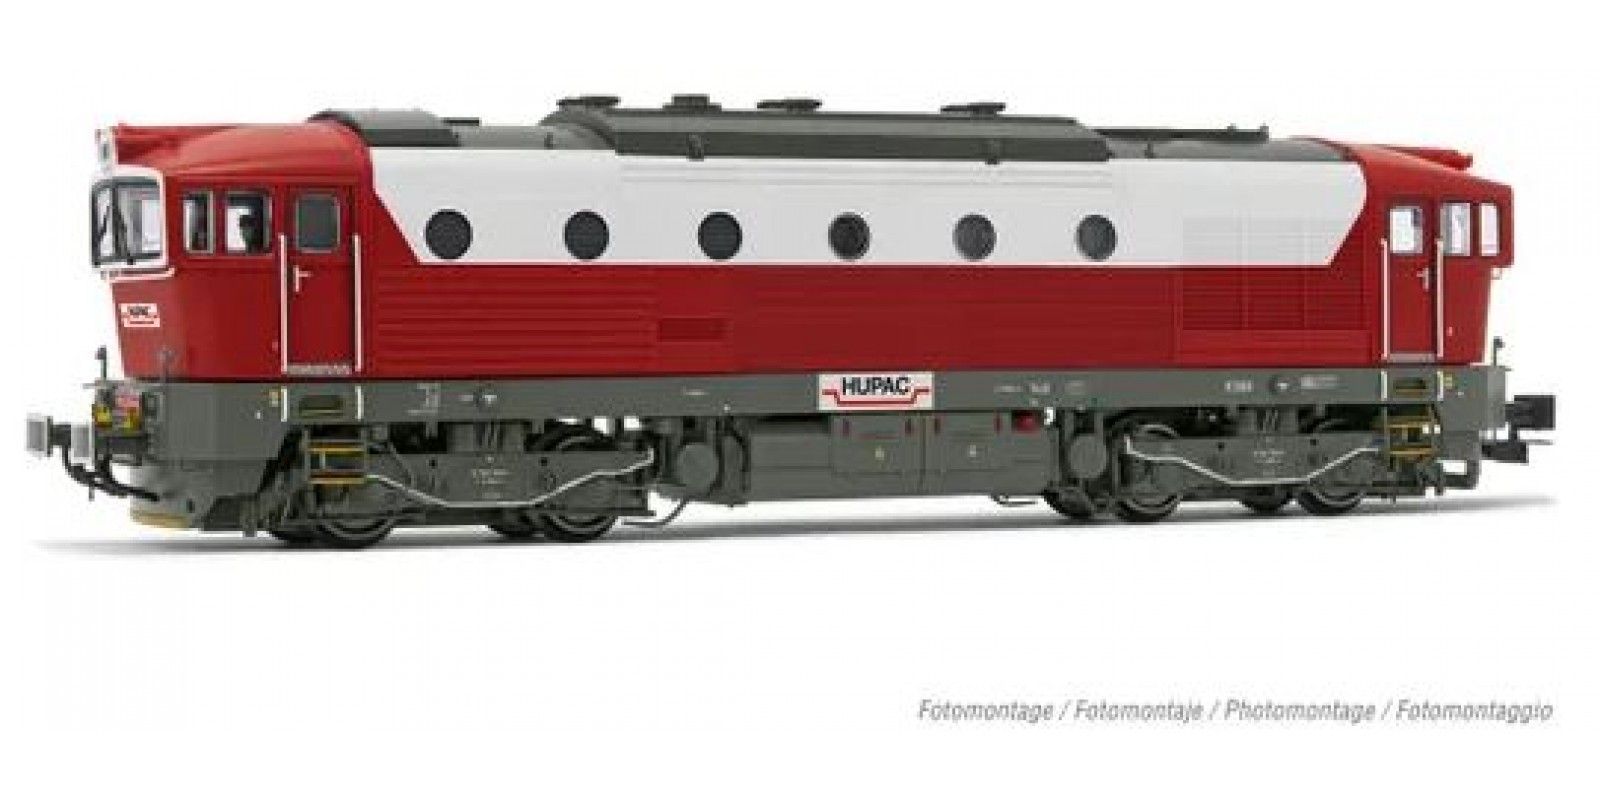 RI2929S HUPAC, 4-axle diesel locomotive class D753.7, red/light grey livery, ep. V-VI, with DCC sound decoder